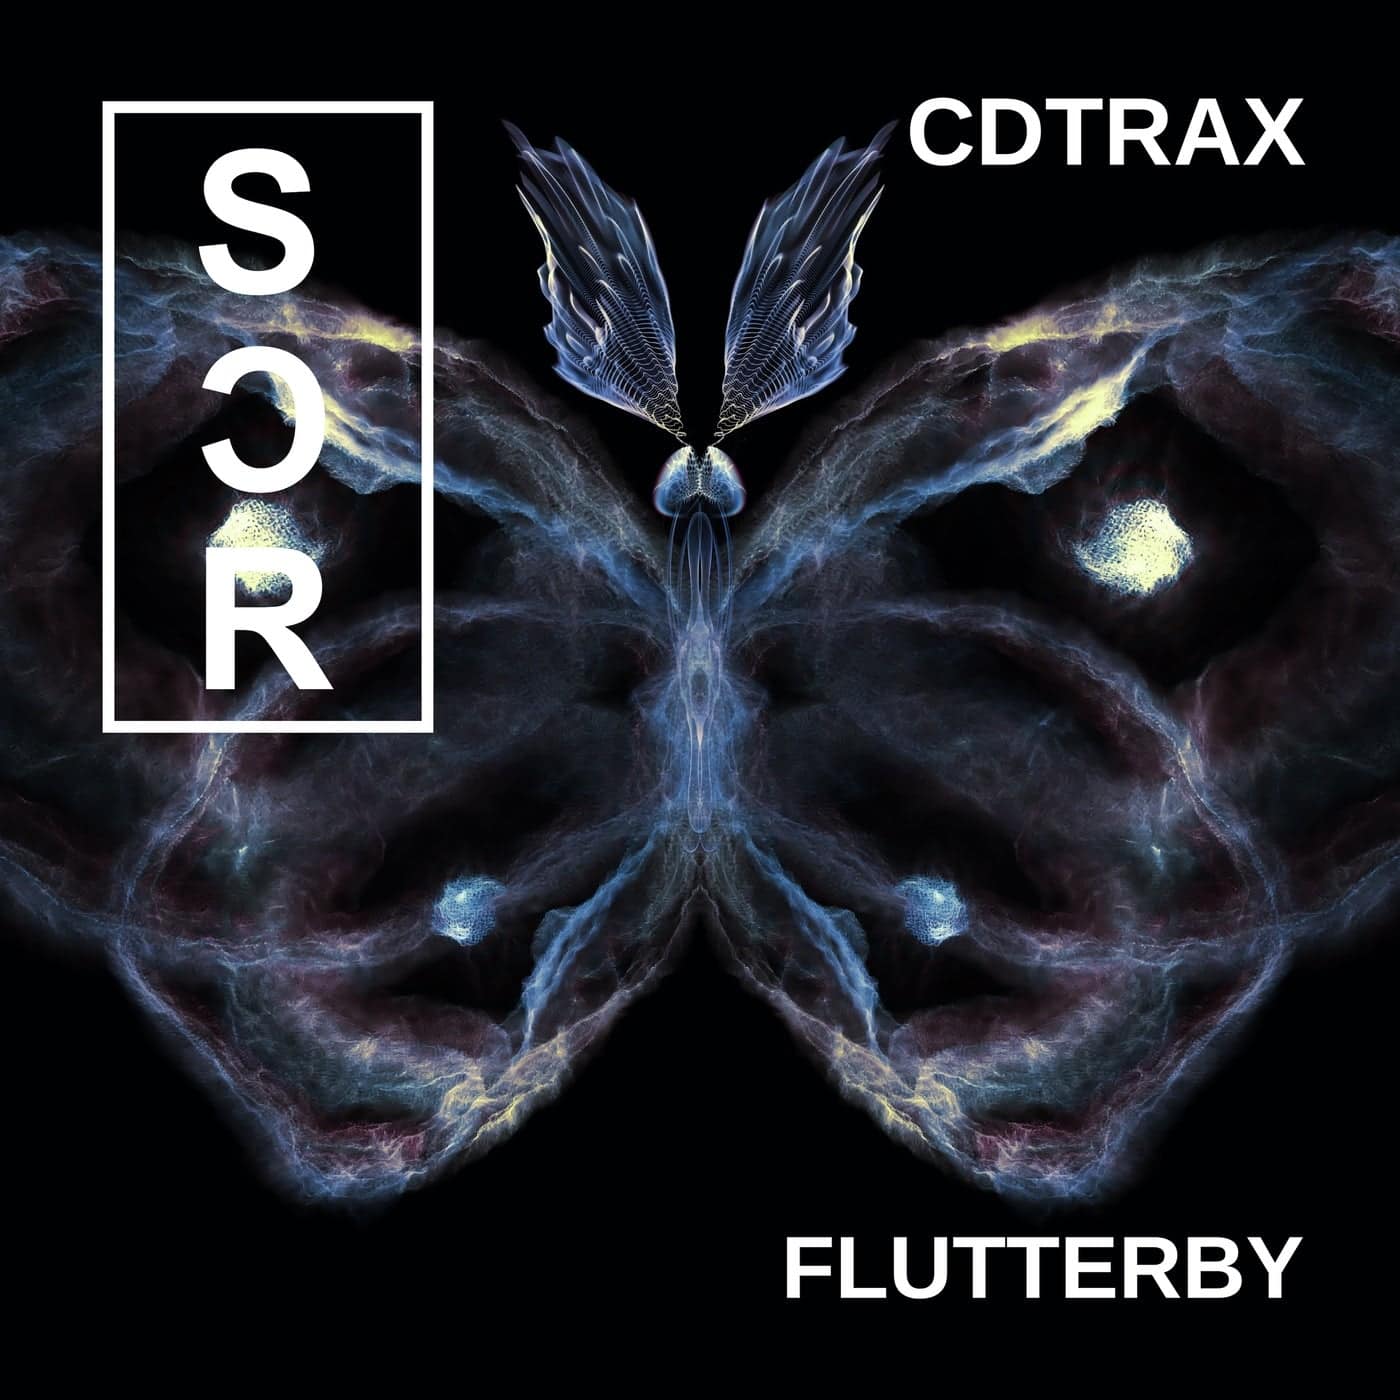 Download CDtrax - Flutterby on Electrobuzz